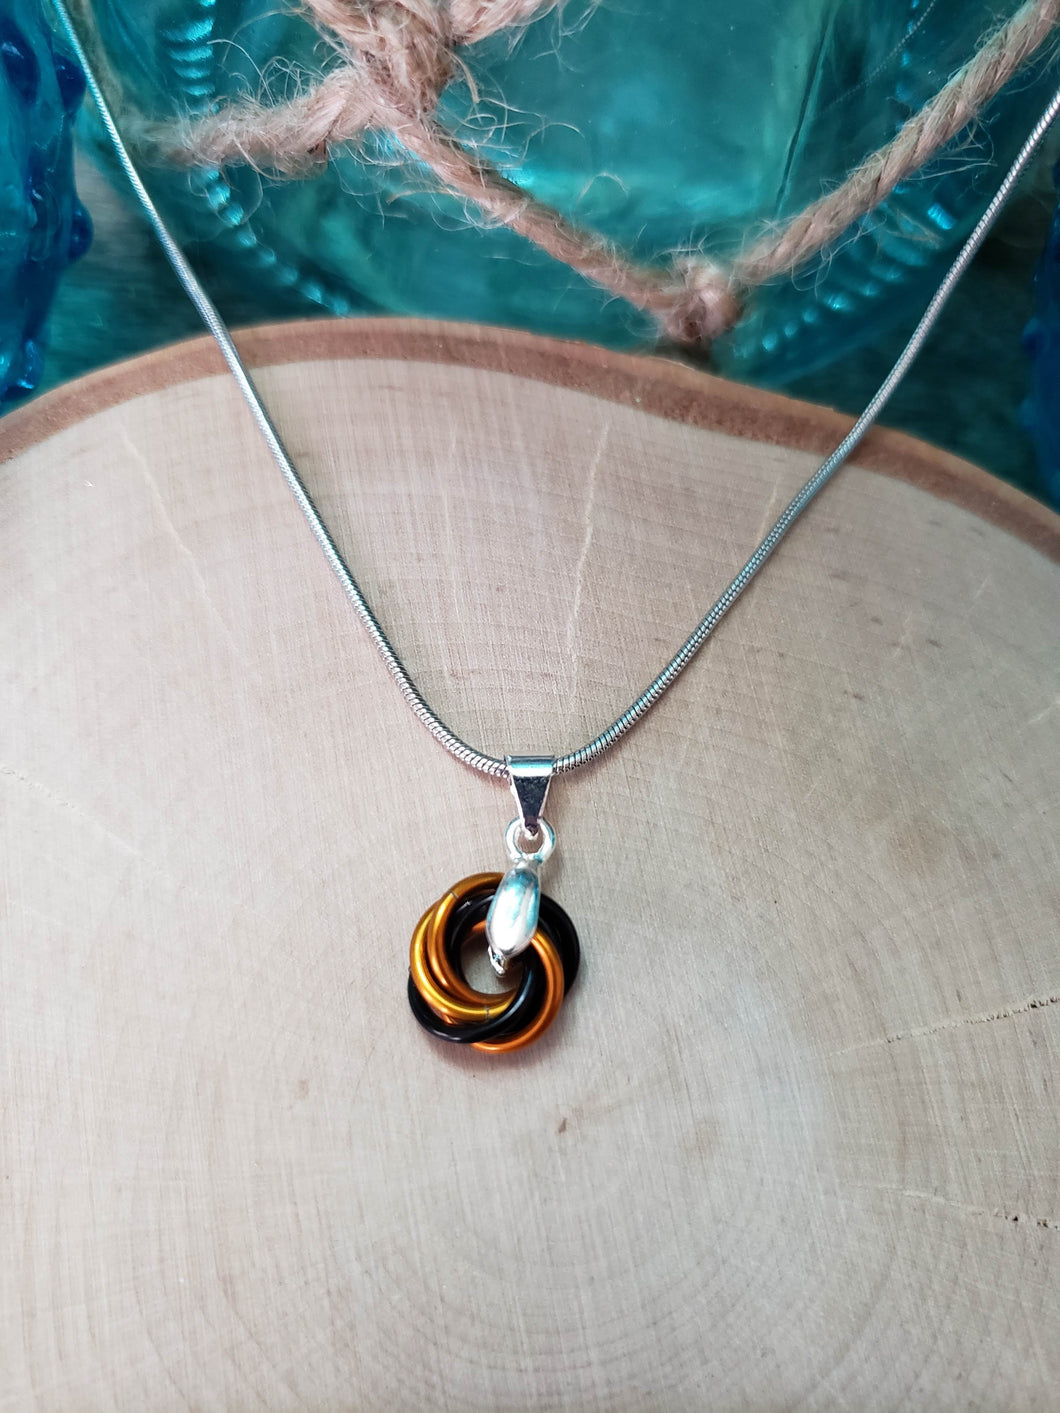 Marmalade and Onyx Chainmaille Small Love Knot Necklace